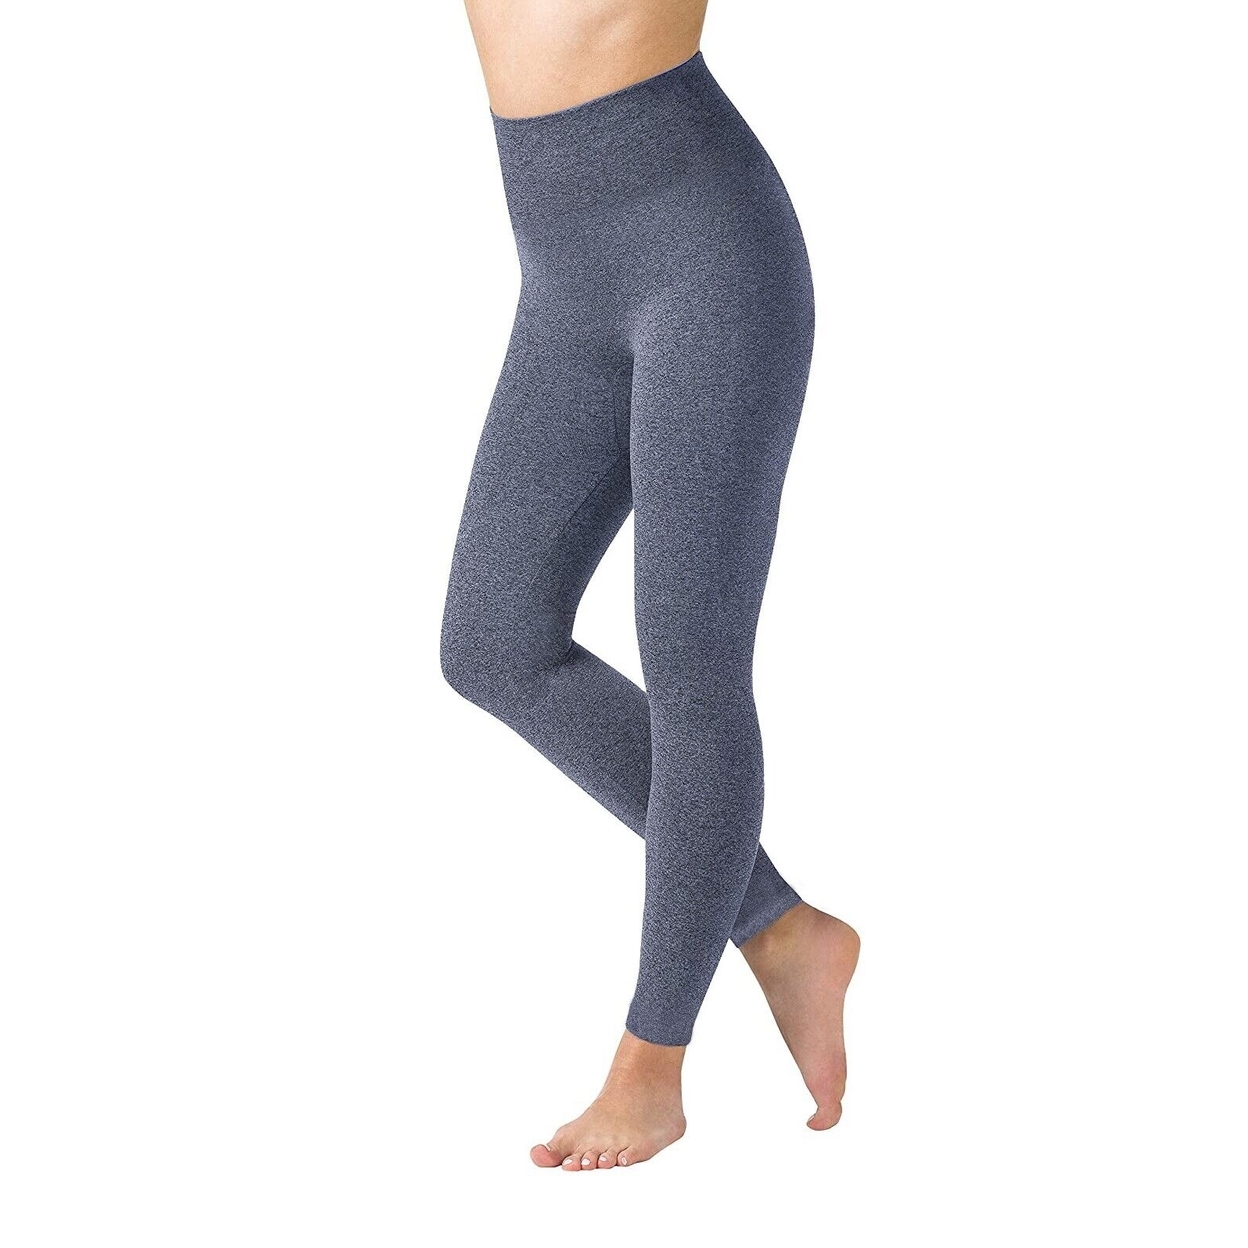 Women's Winter Warm Marled High Waist Fleece Lined Thick Thermal Leggings Pants - Navy, Small